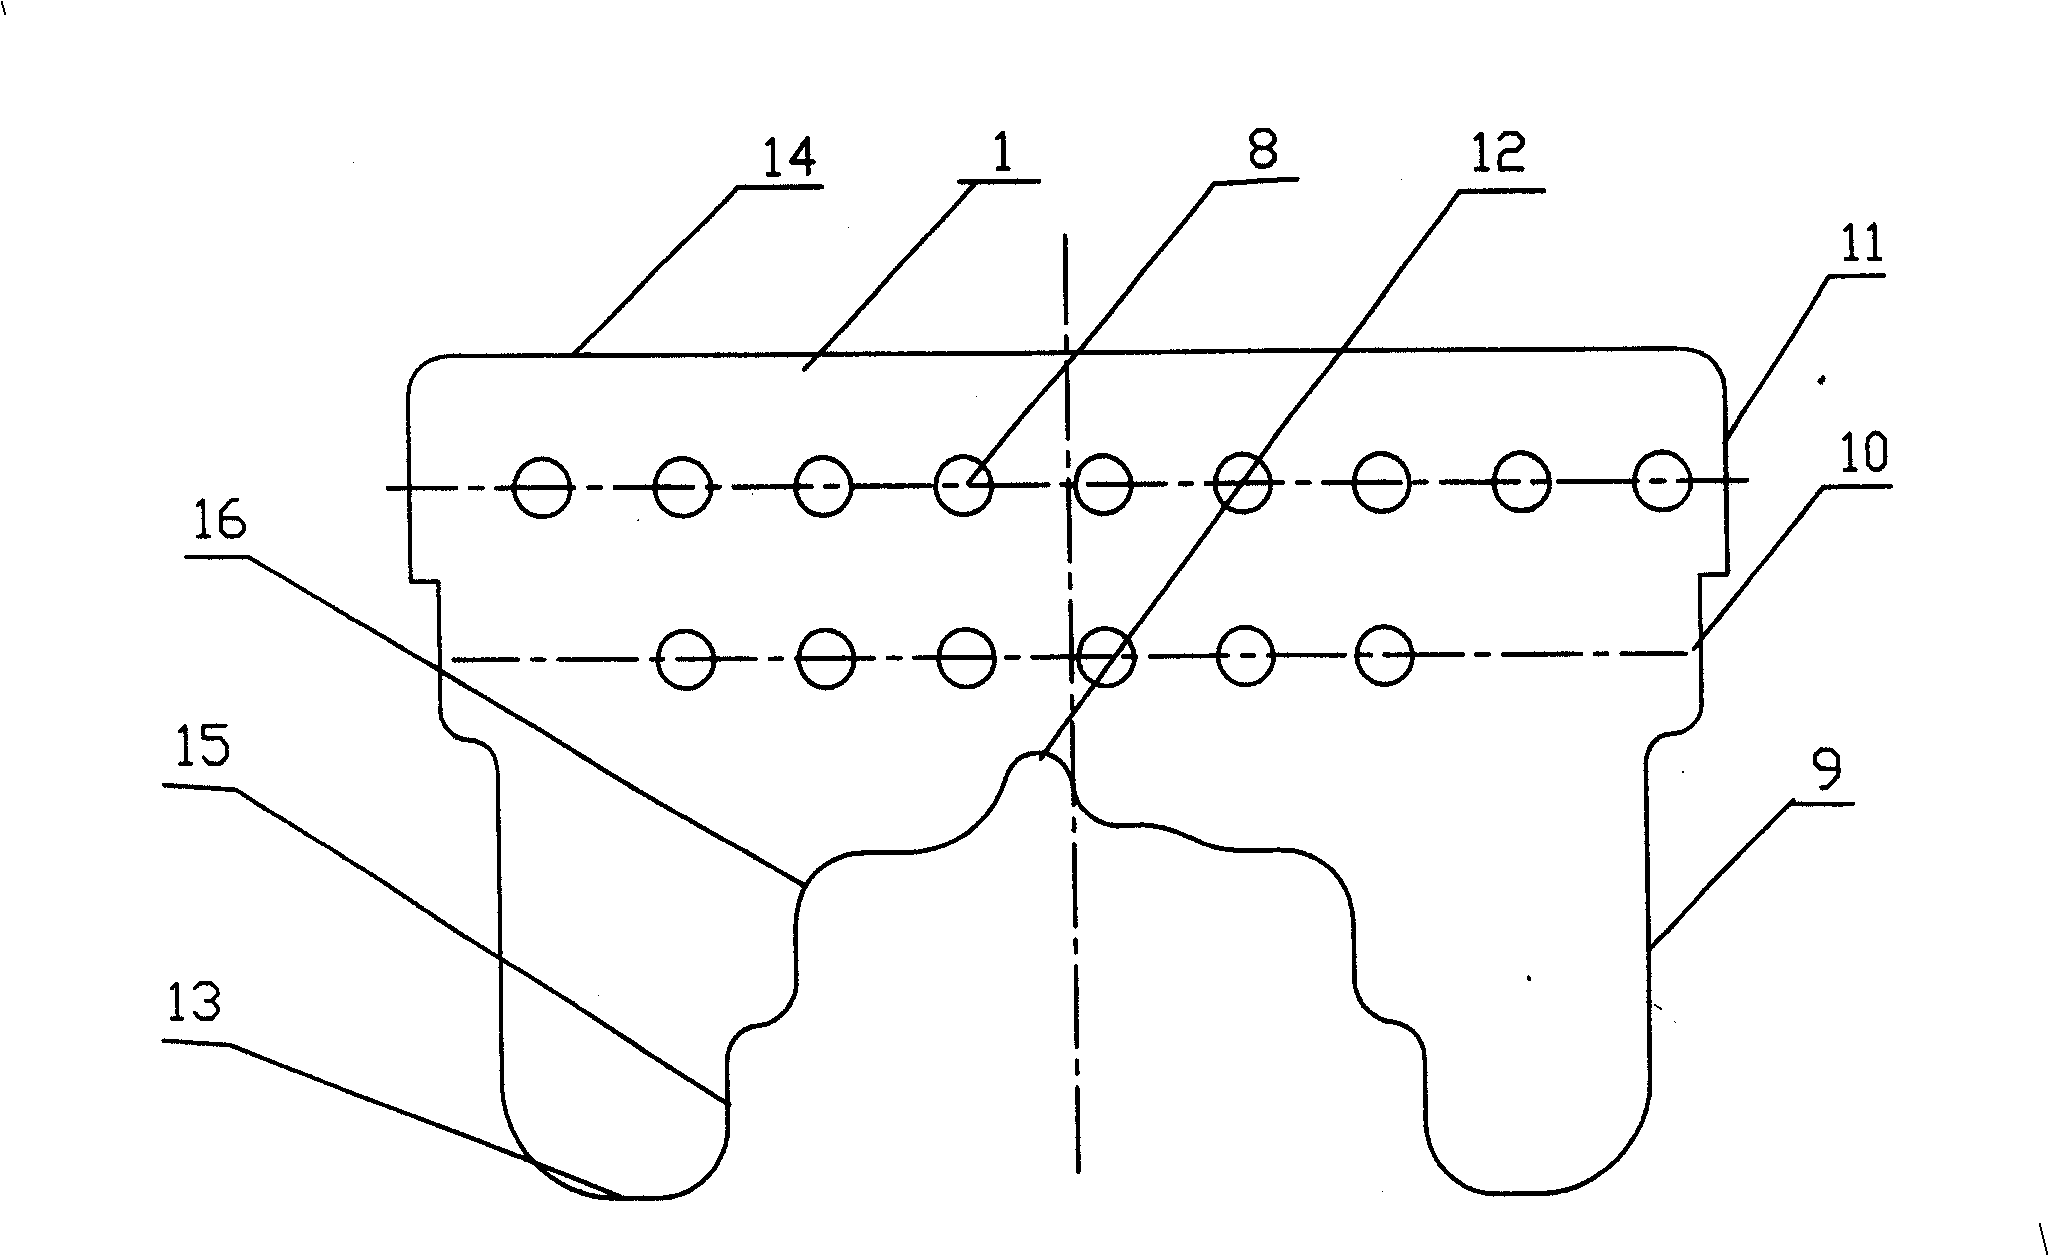 Arc-extinguishing device for load switch